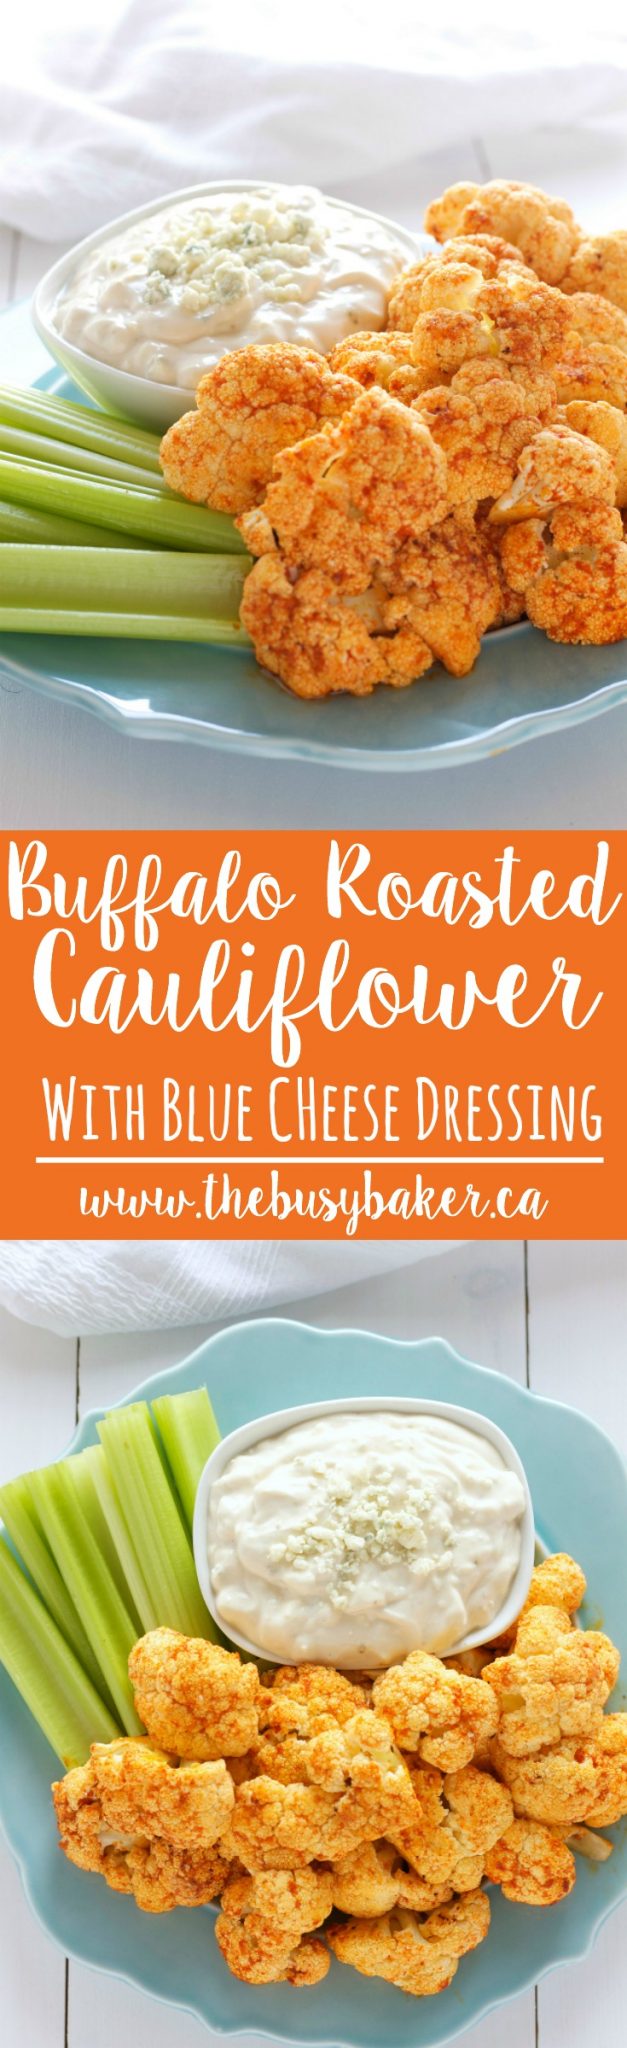 Buffalo Roasted Cauliflower with Blue Cheese Dipping Sauce is the perfect healthy game day appetizer or savoury snack that's low carb and gluten-free.  Recipe from thebusybaker.ca! via @busybakerblog